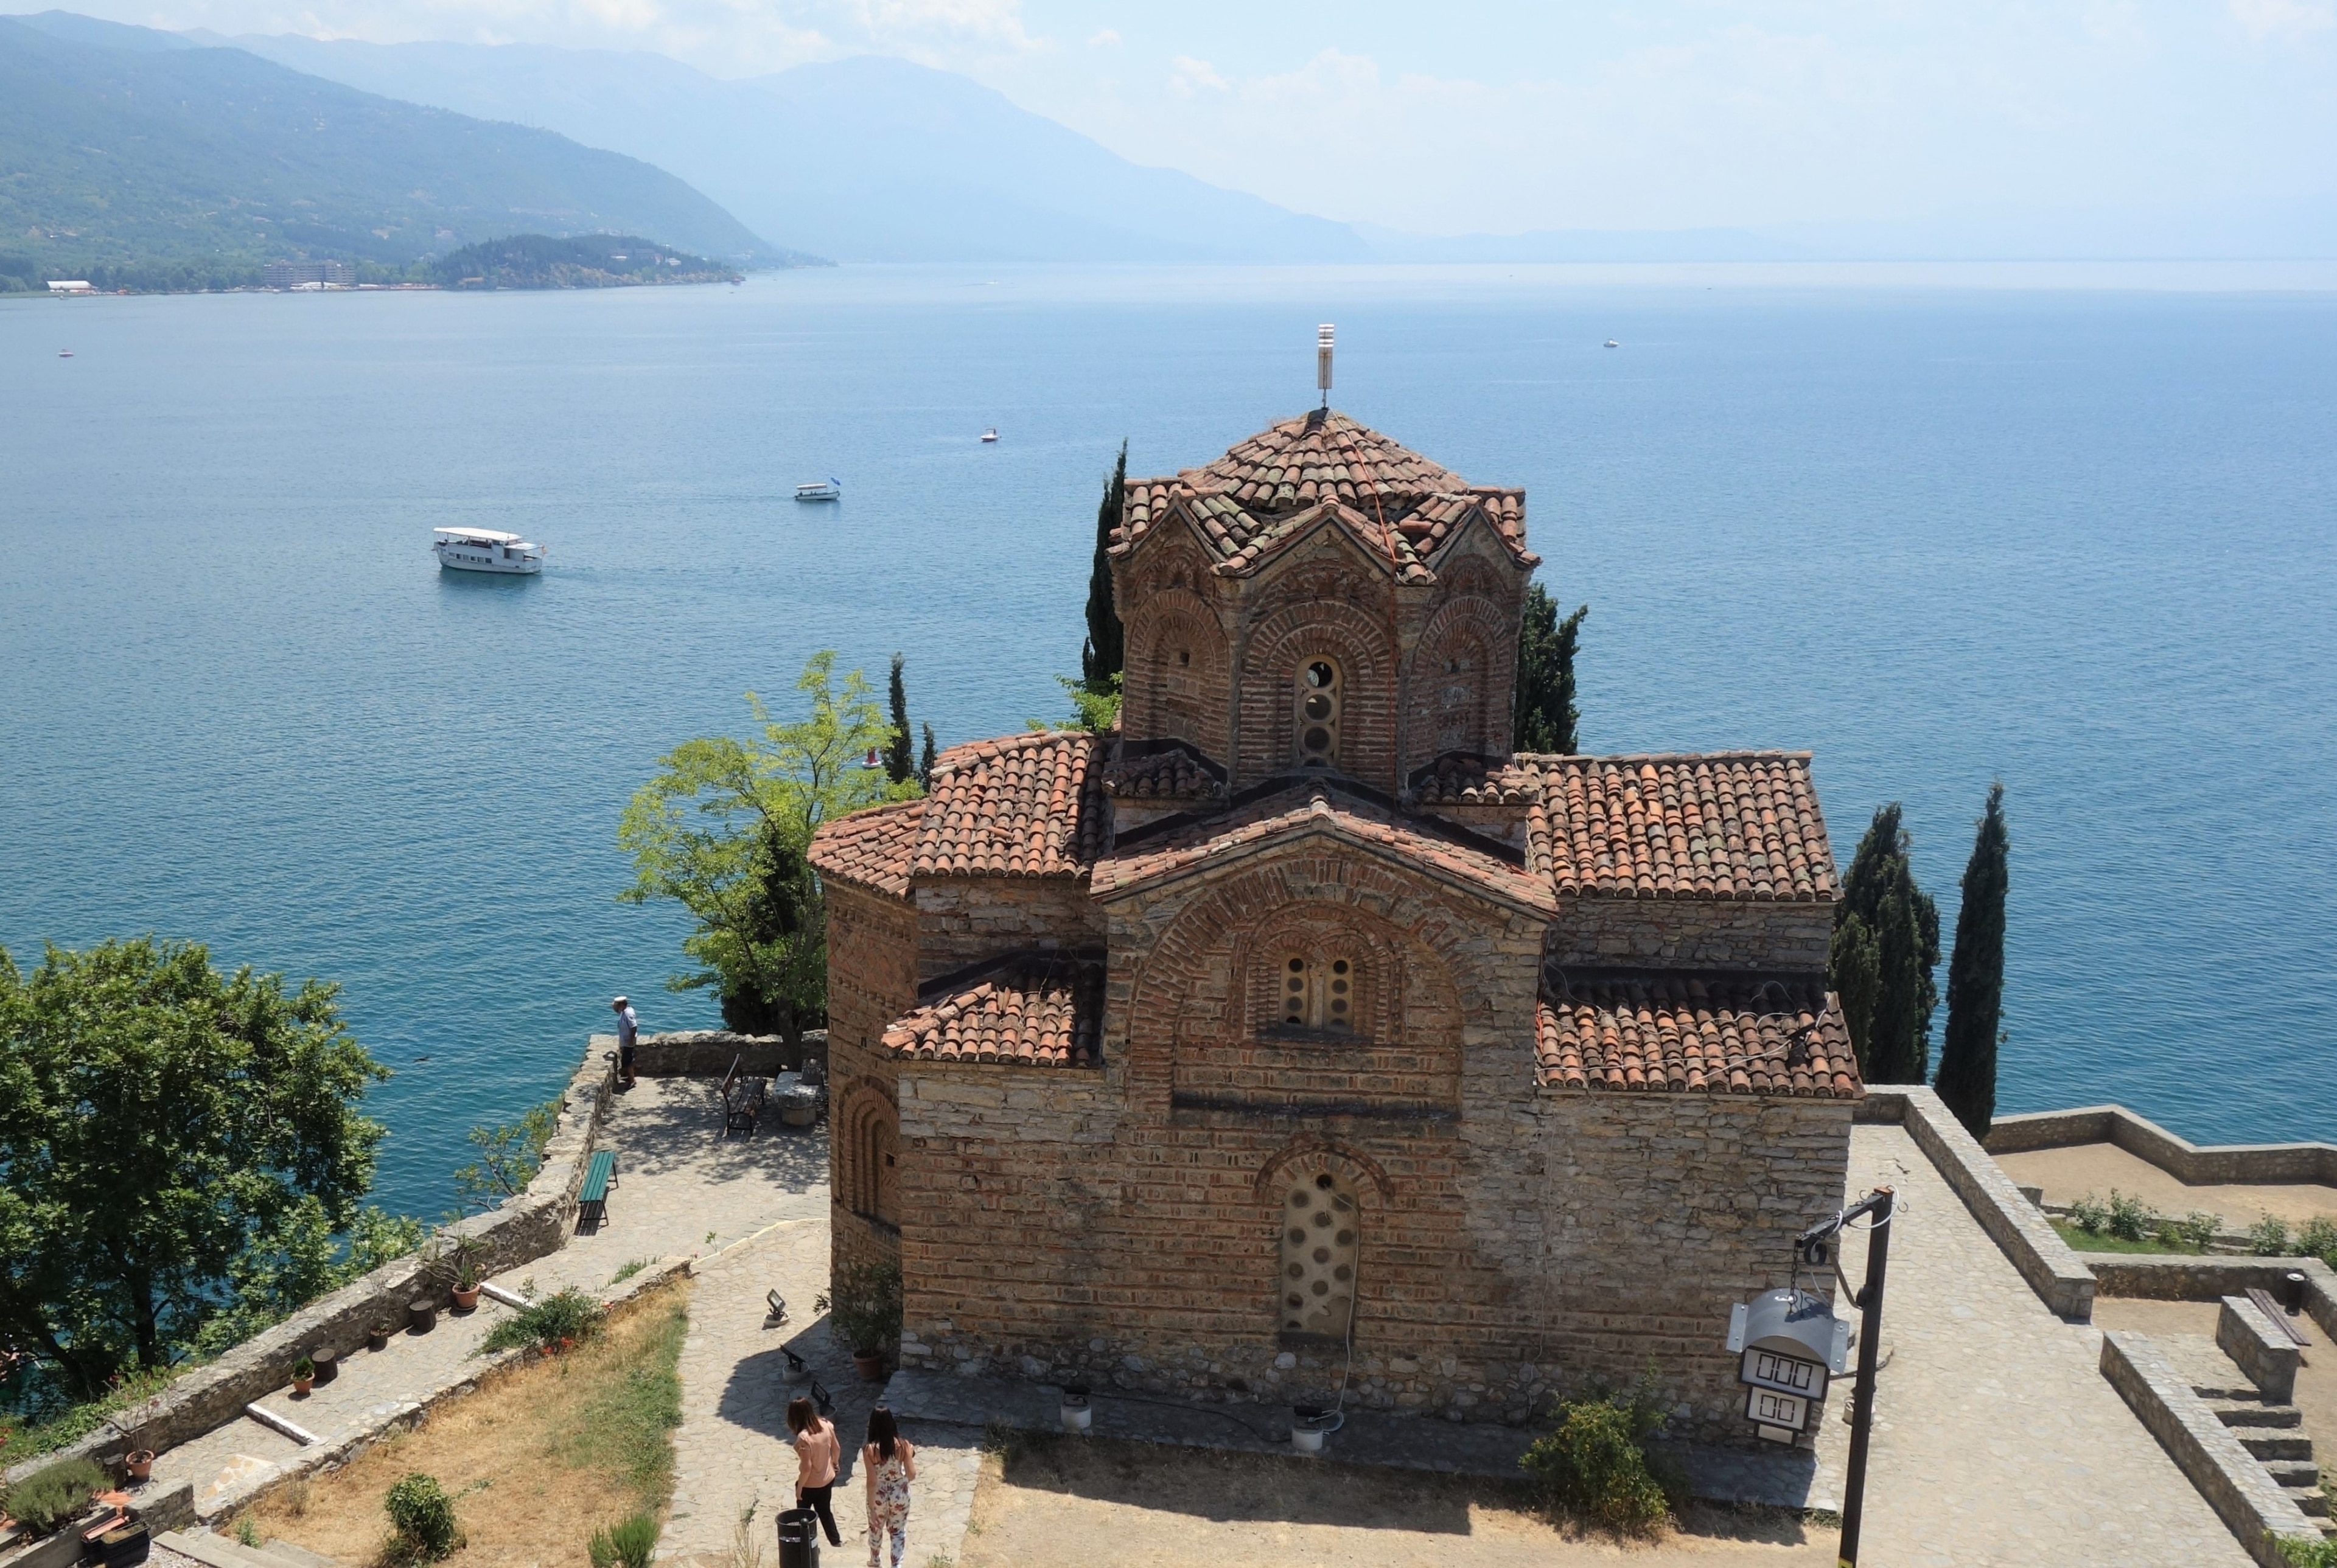 If you have ever seen an image of the Republic of North-Macedonia, it will almost certainly be of the cute little church of St Jovan Kaneo on a clifftop rising up from Lake Ohrid. That lake is one of the oldest in the world, almost certainly the oldest in Europe, and among the deepest too. Not surprisingly, it has a rich history and is a UNESCO World Heritage site. #GreatOutdoors  #Perspectives  #Culture  #LocalSecrets